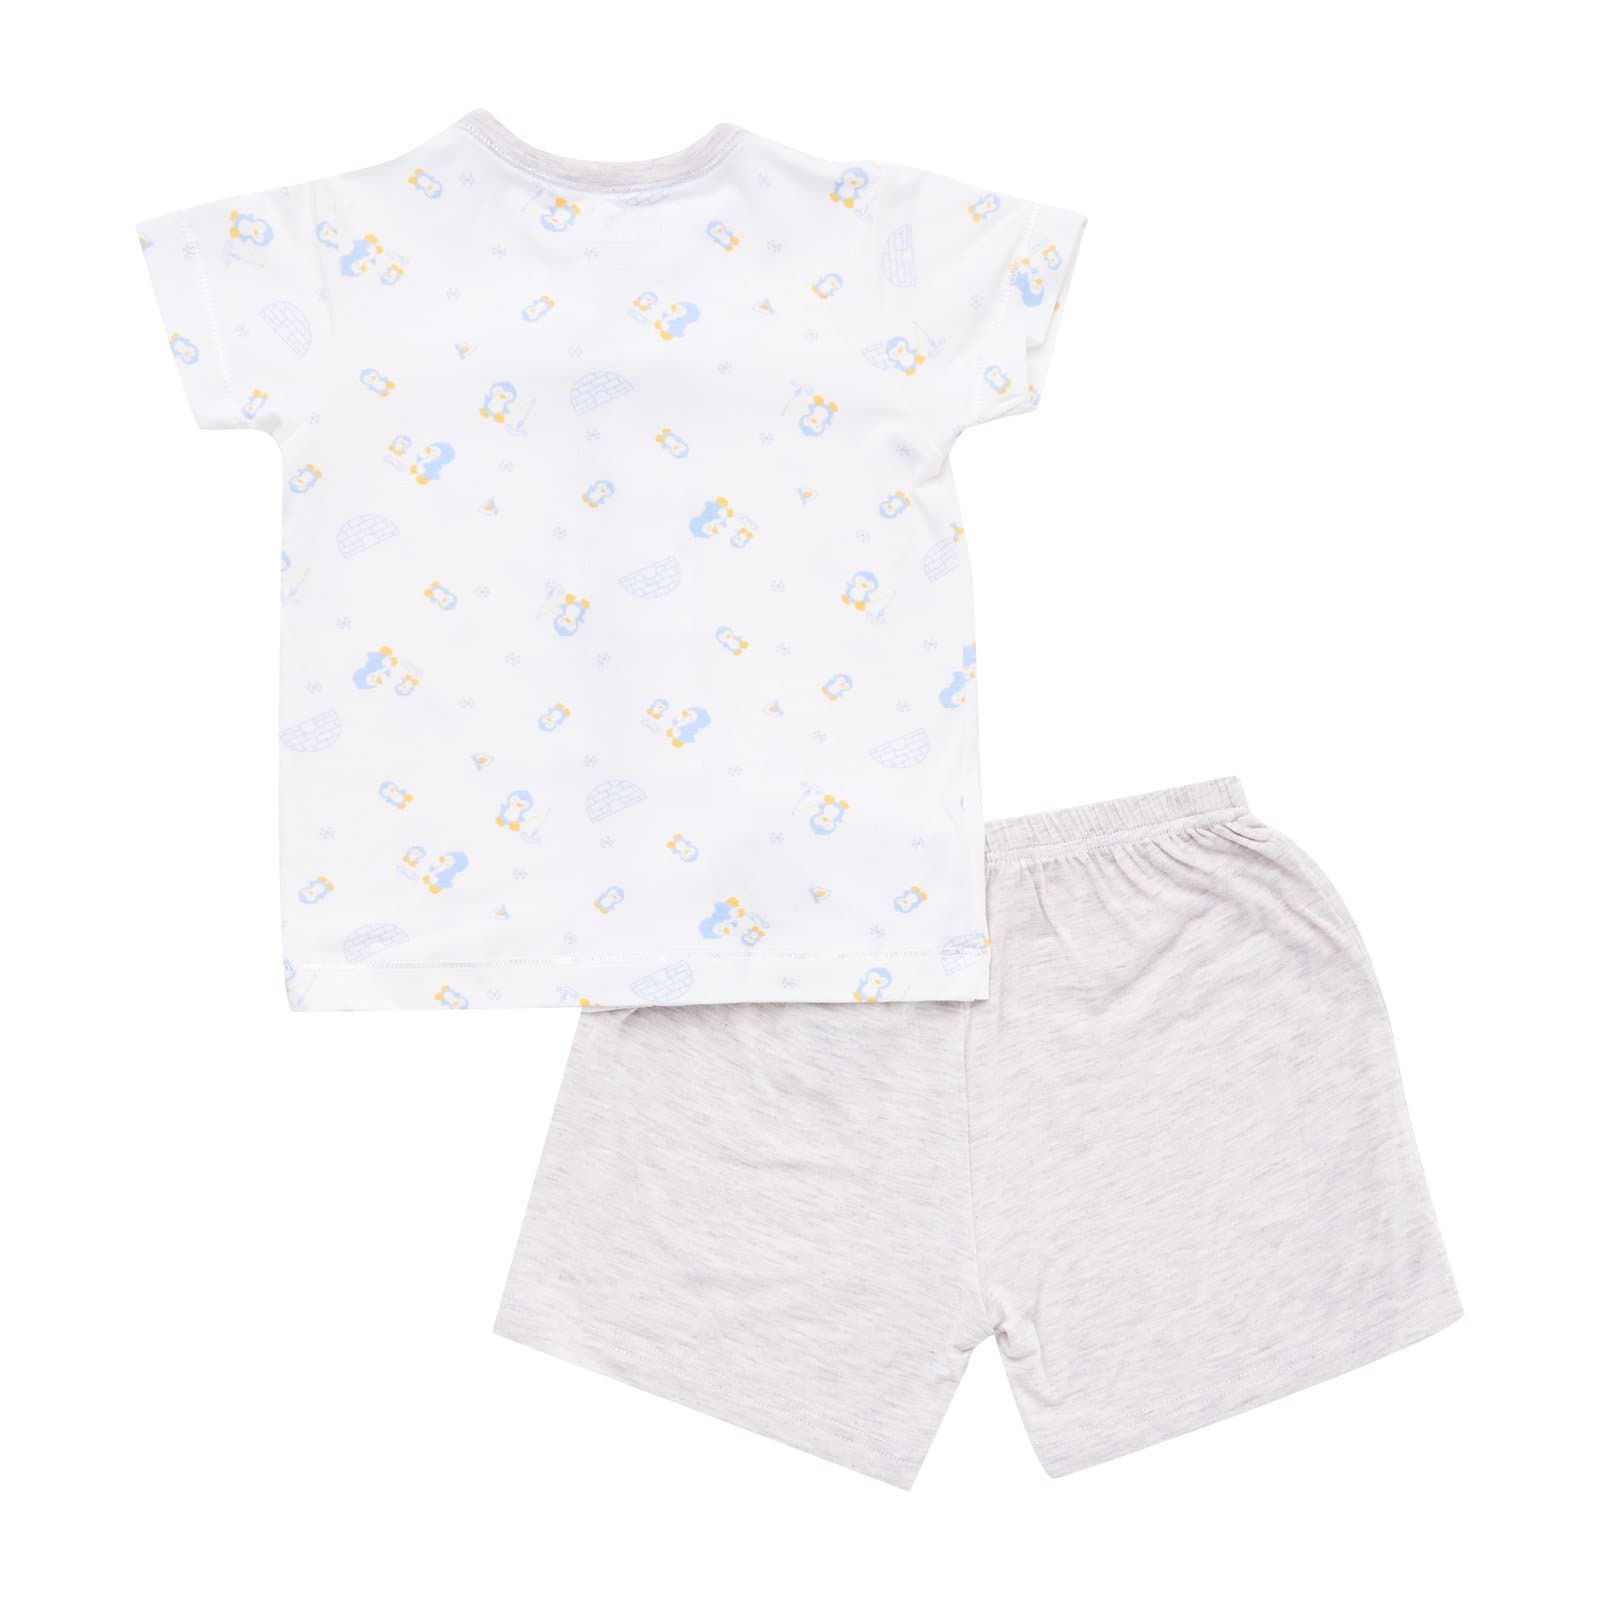 Penguins - Short sleeved button vest with shorts - Simply Life